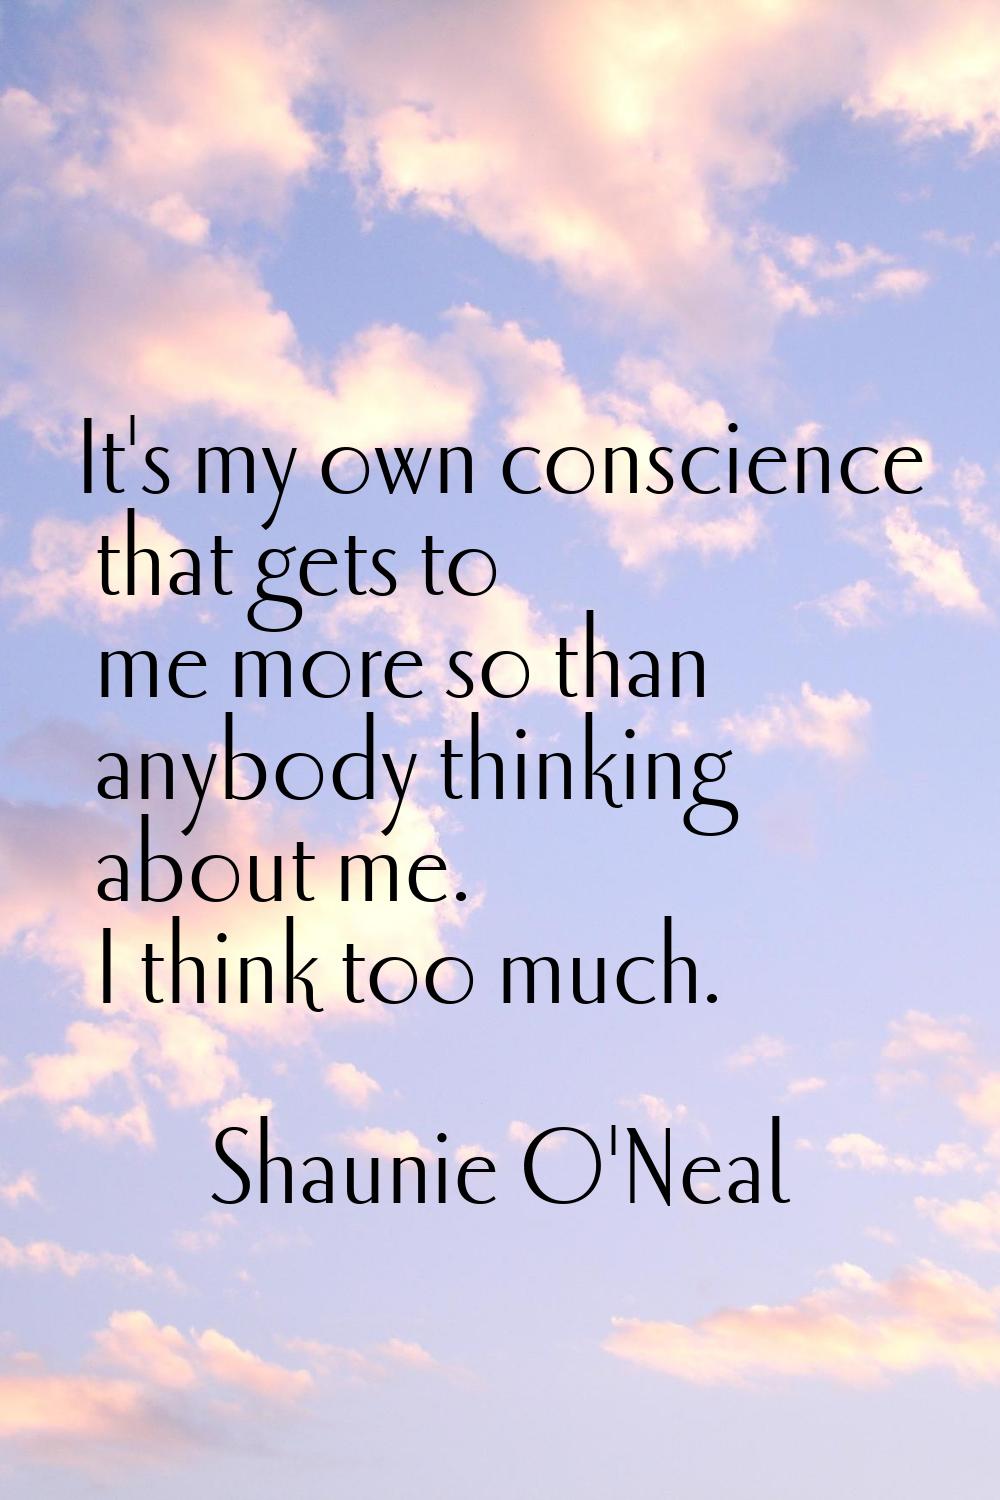 It's my own conscience that gets to me more so than anybody thinking about me. I think too much.